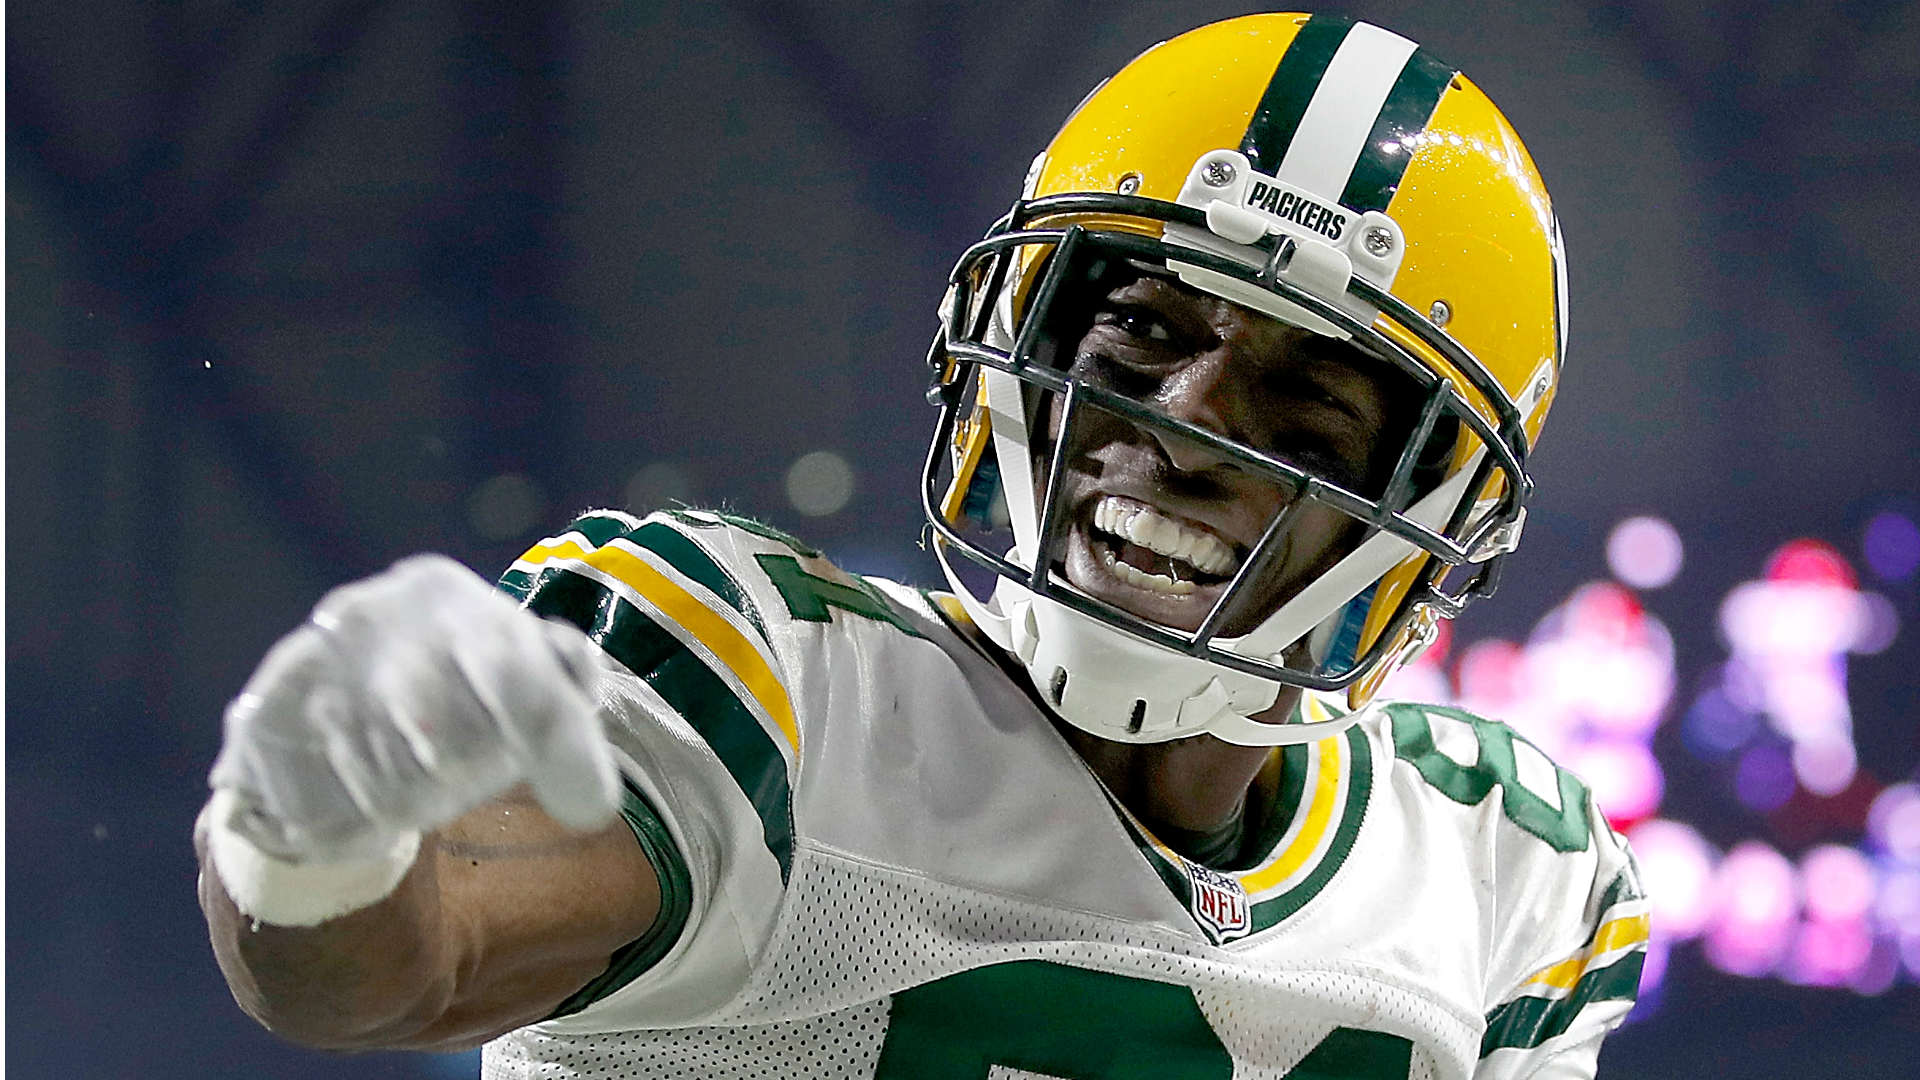 Geronimo Allison injury update: Packers place WR (groin) on injured reserve